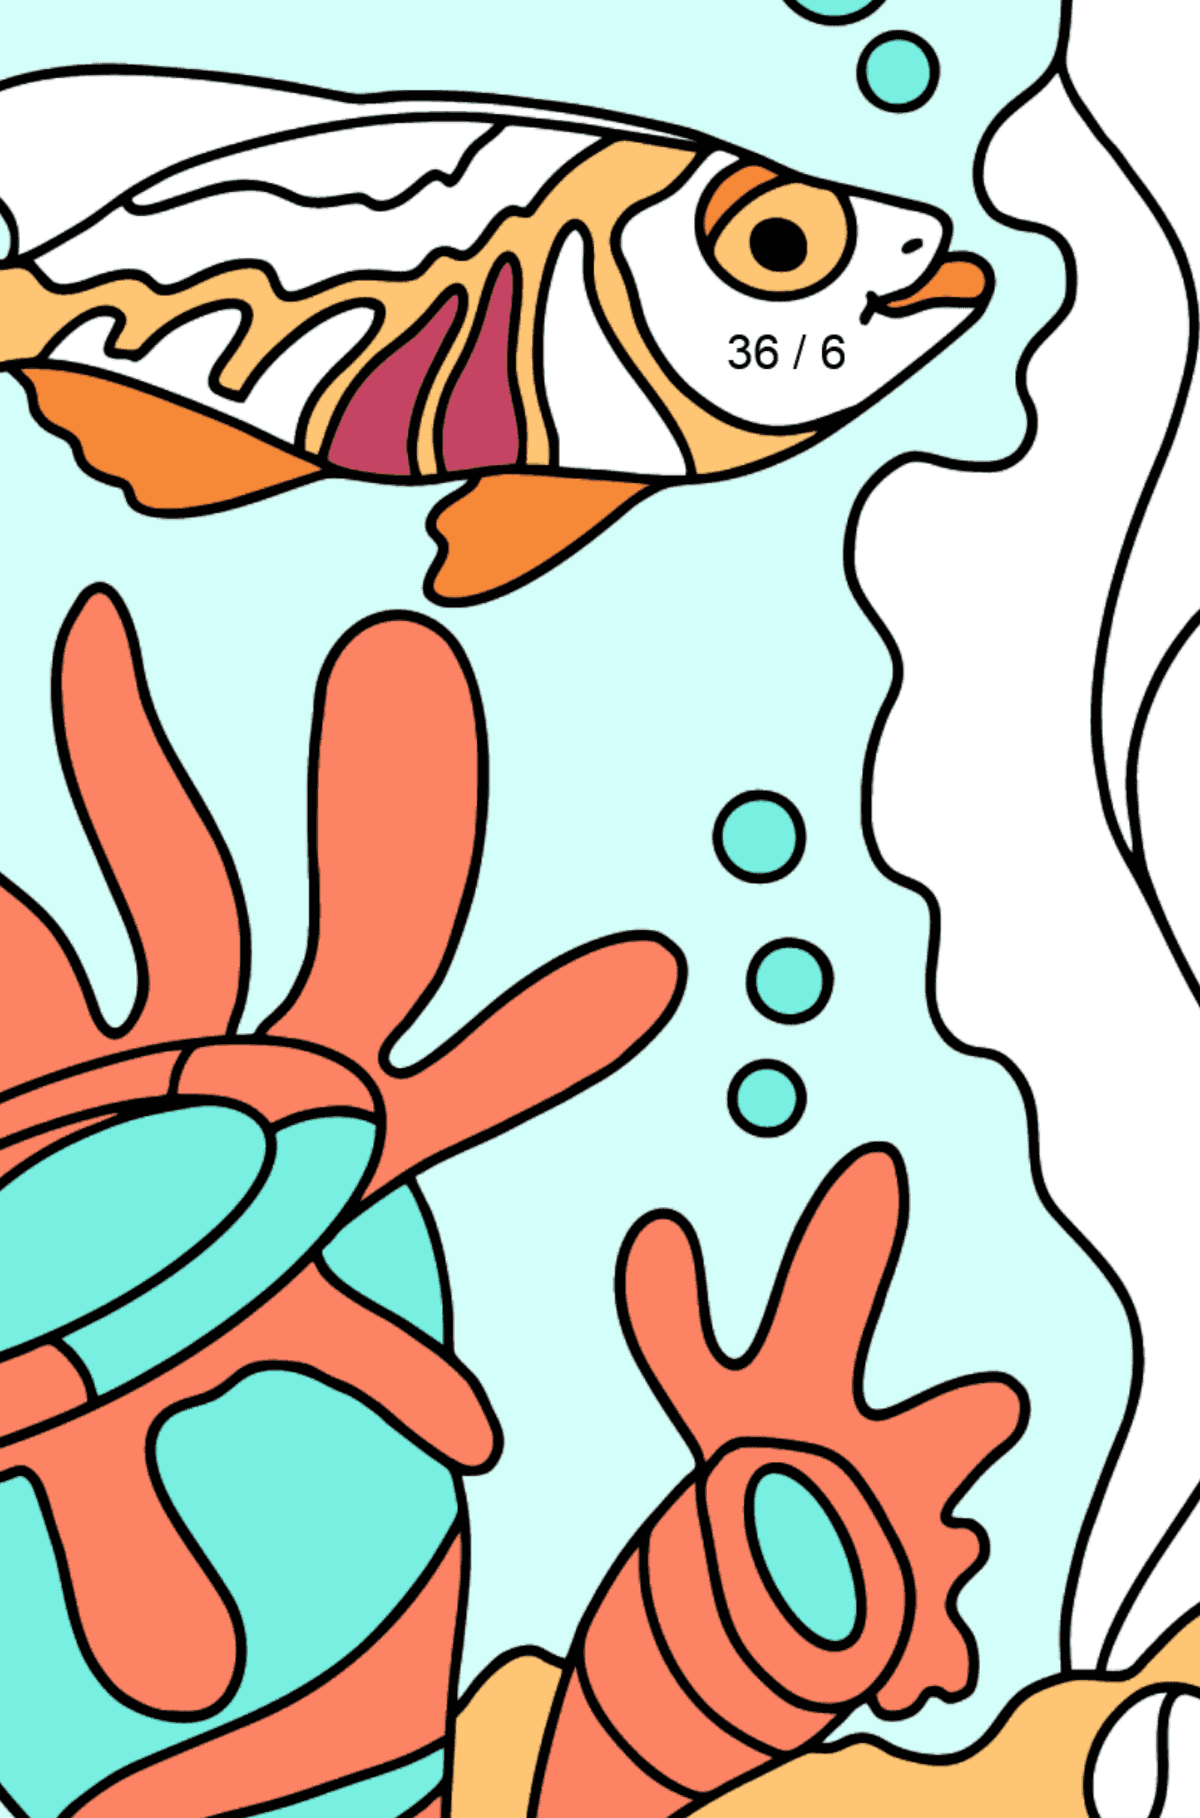 Coloring Page - A Fish is Watching the Corals Dreamily - Math Coloring - Division for Kids